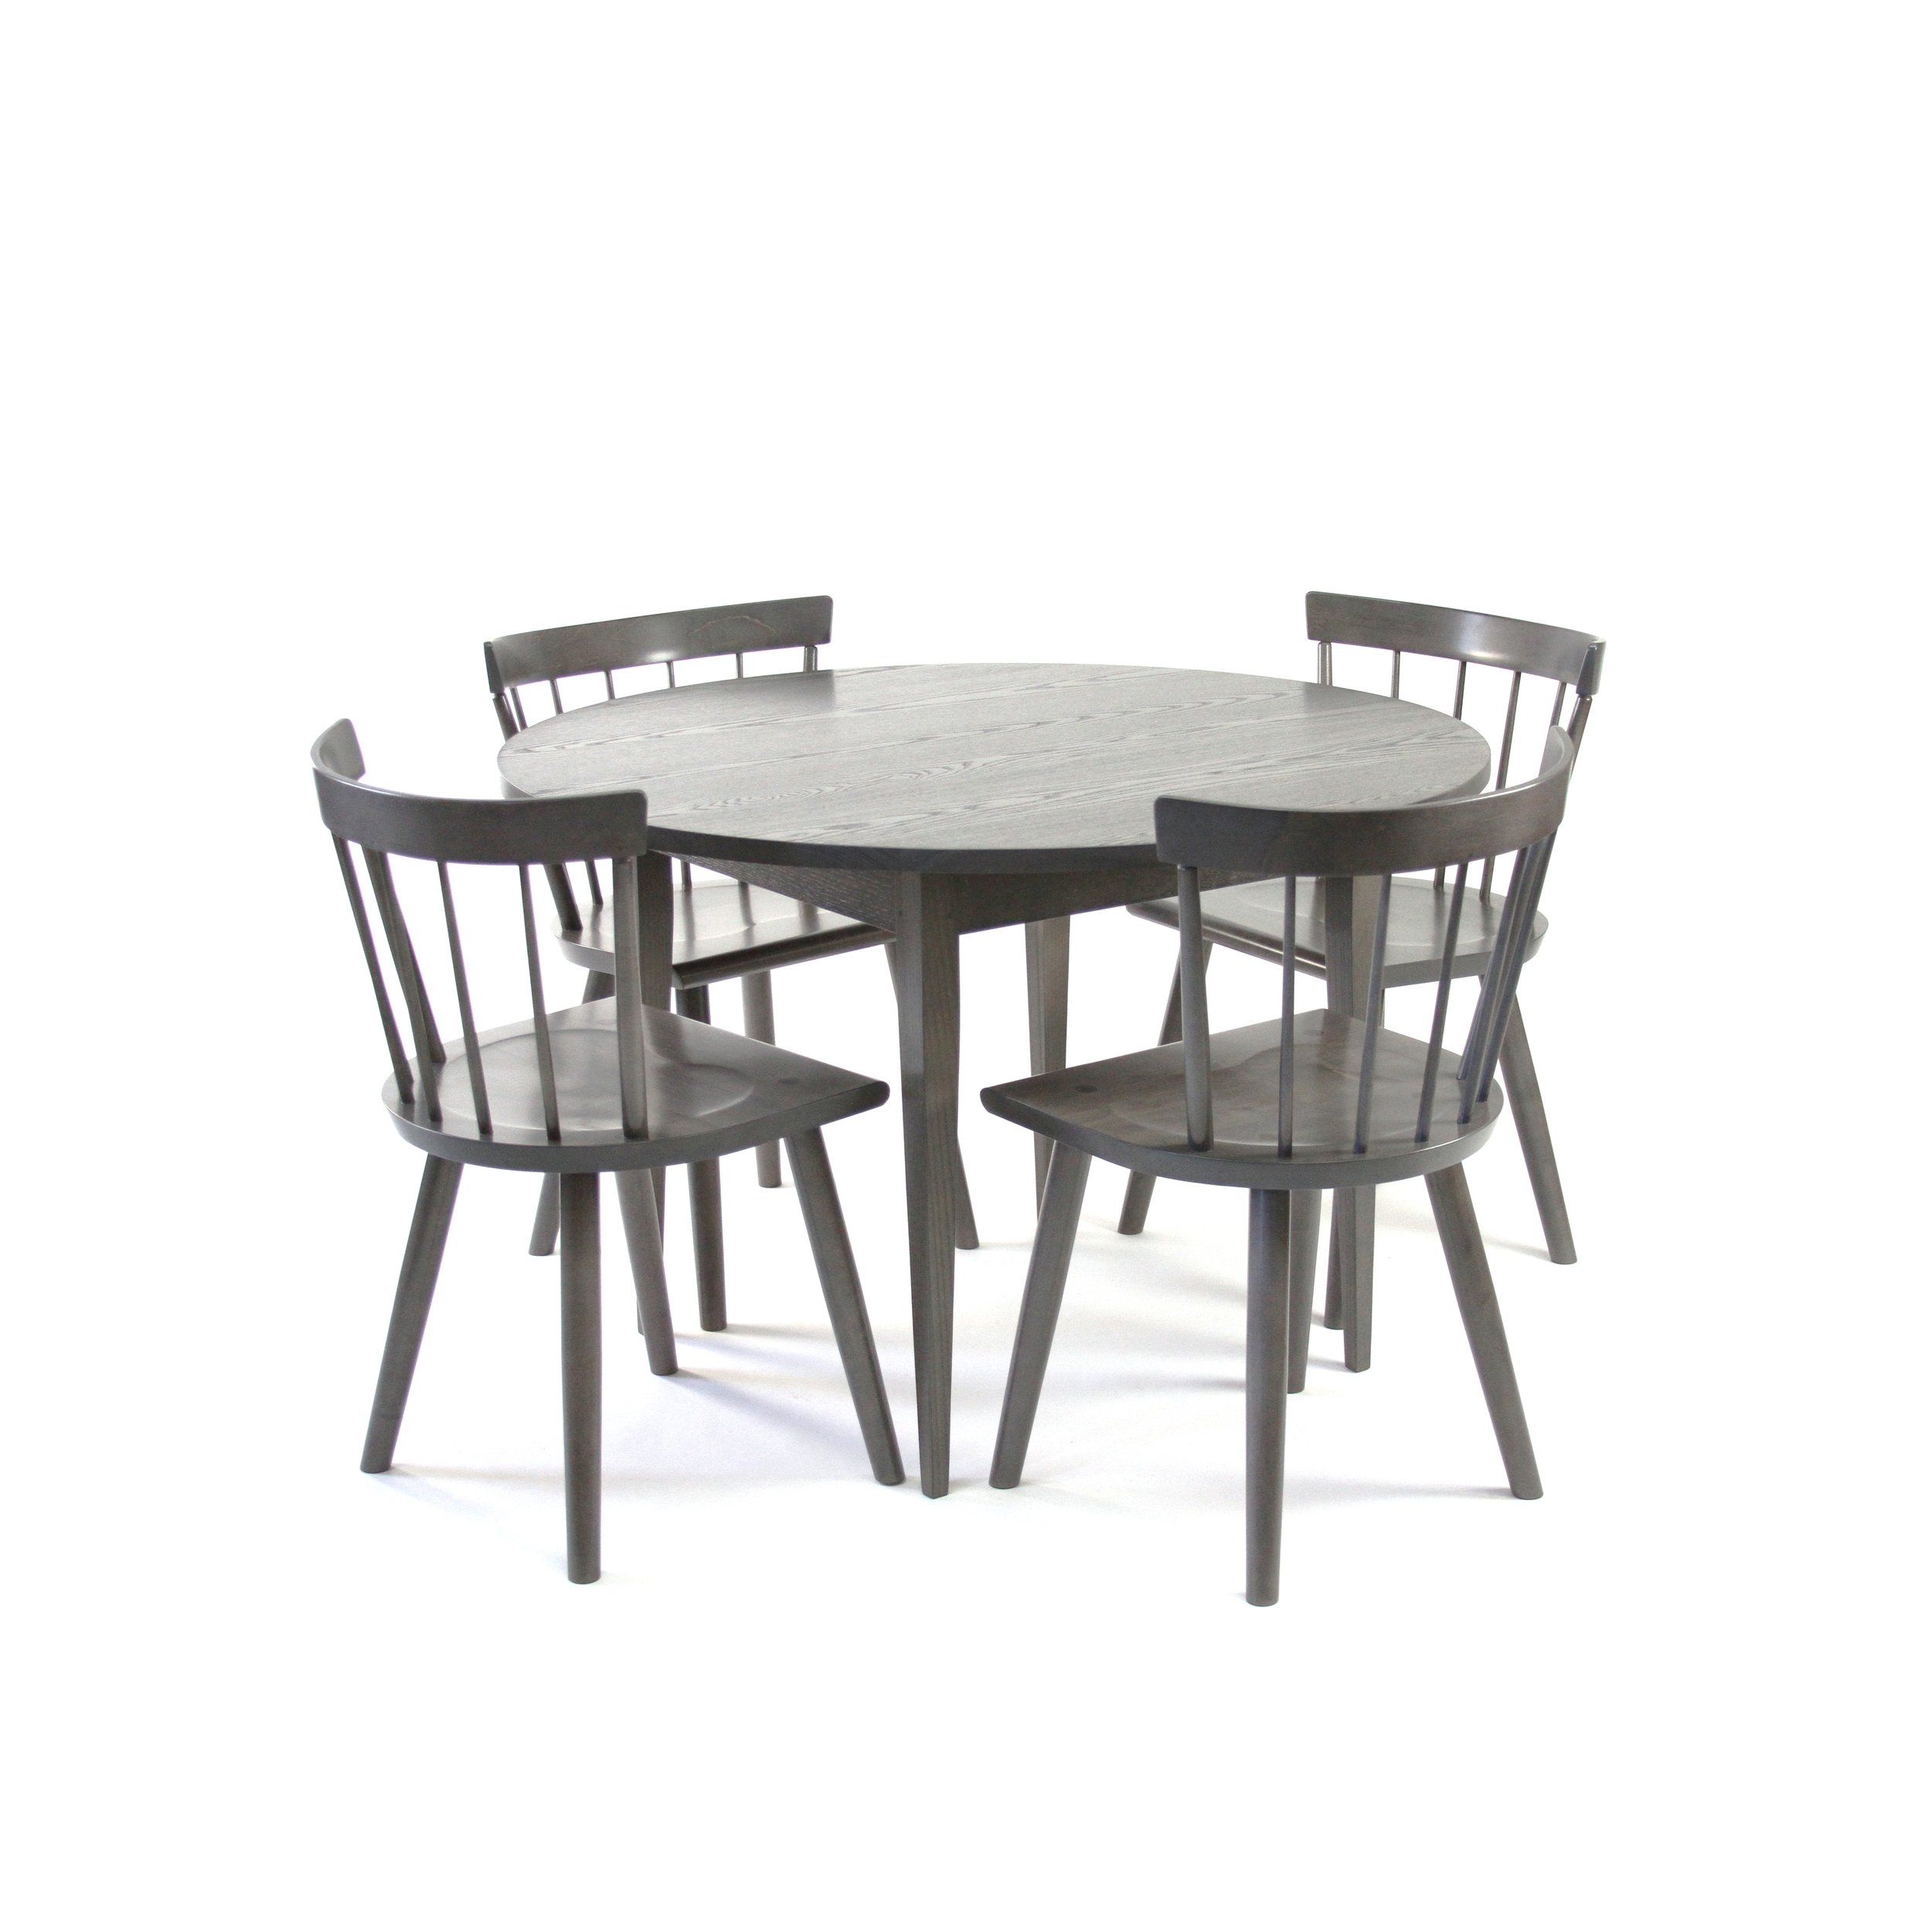 Harvest Dining Table Round with Colt Low Back Chairs - 44 Lichen Ash.jpg